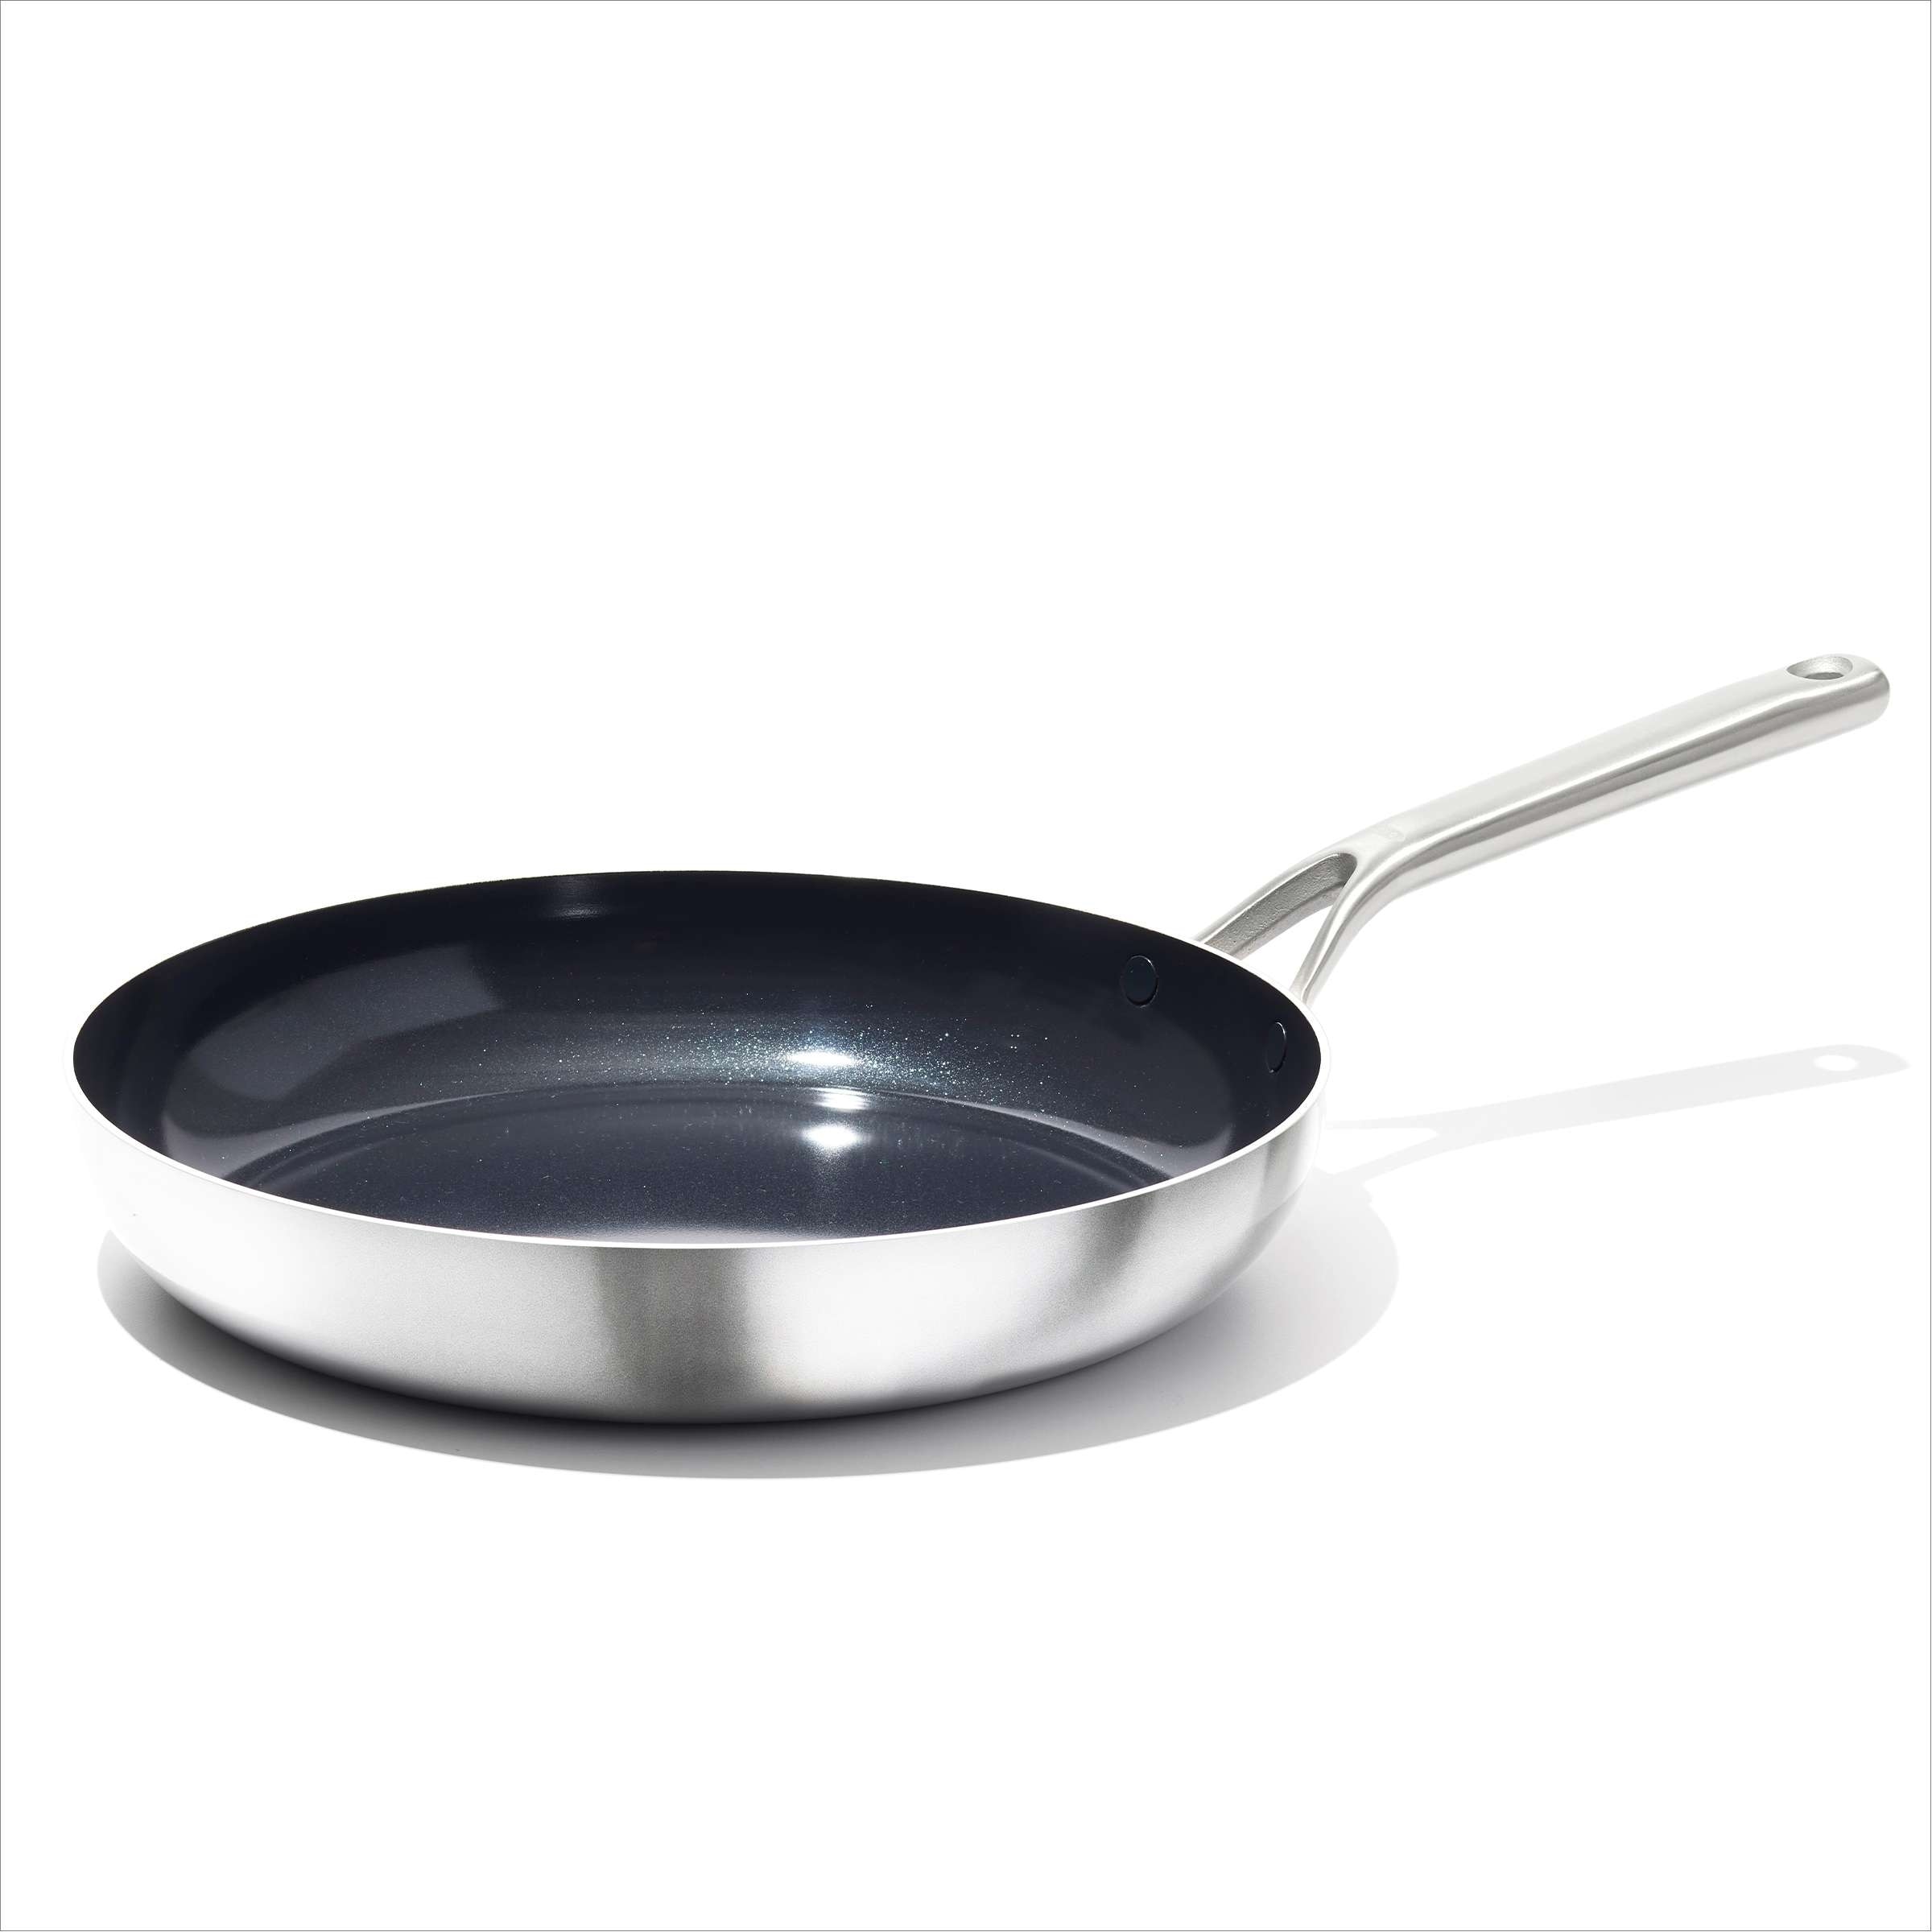 https://ak1.ostkcdn.com/images/products/is/images/direct/e853e30f2df956b47772132095d66c1aa06cb87a/OXO-Mira-3-Ply-Stainless-Steel-Non-Stick-Frying-Pan%2C-12%22.jpg